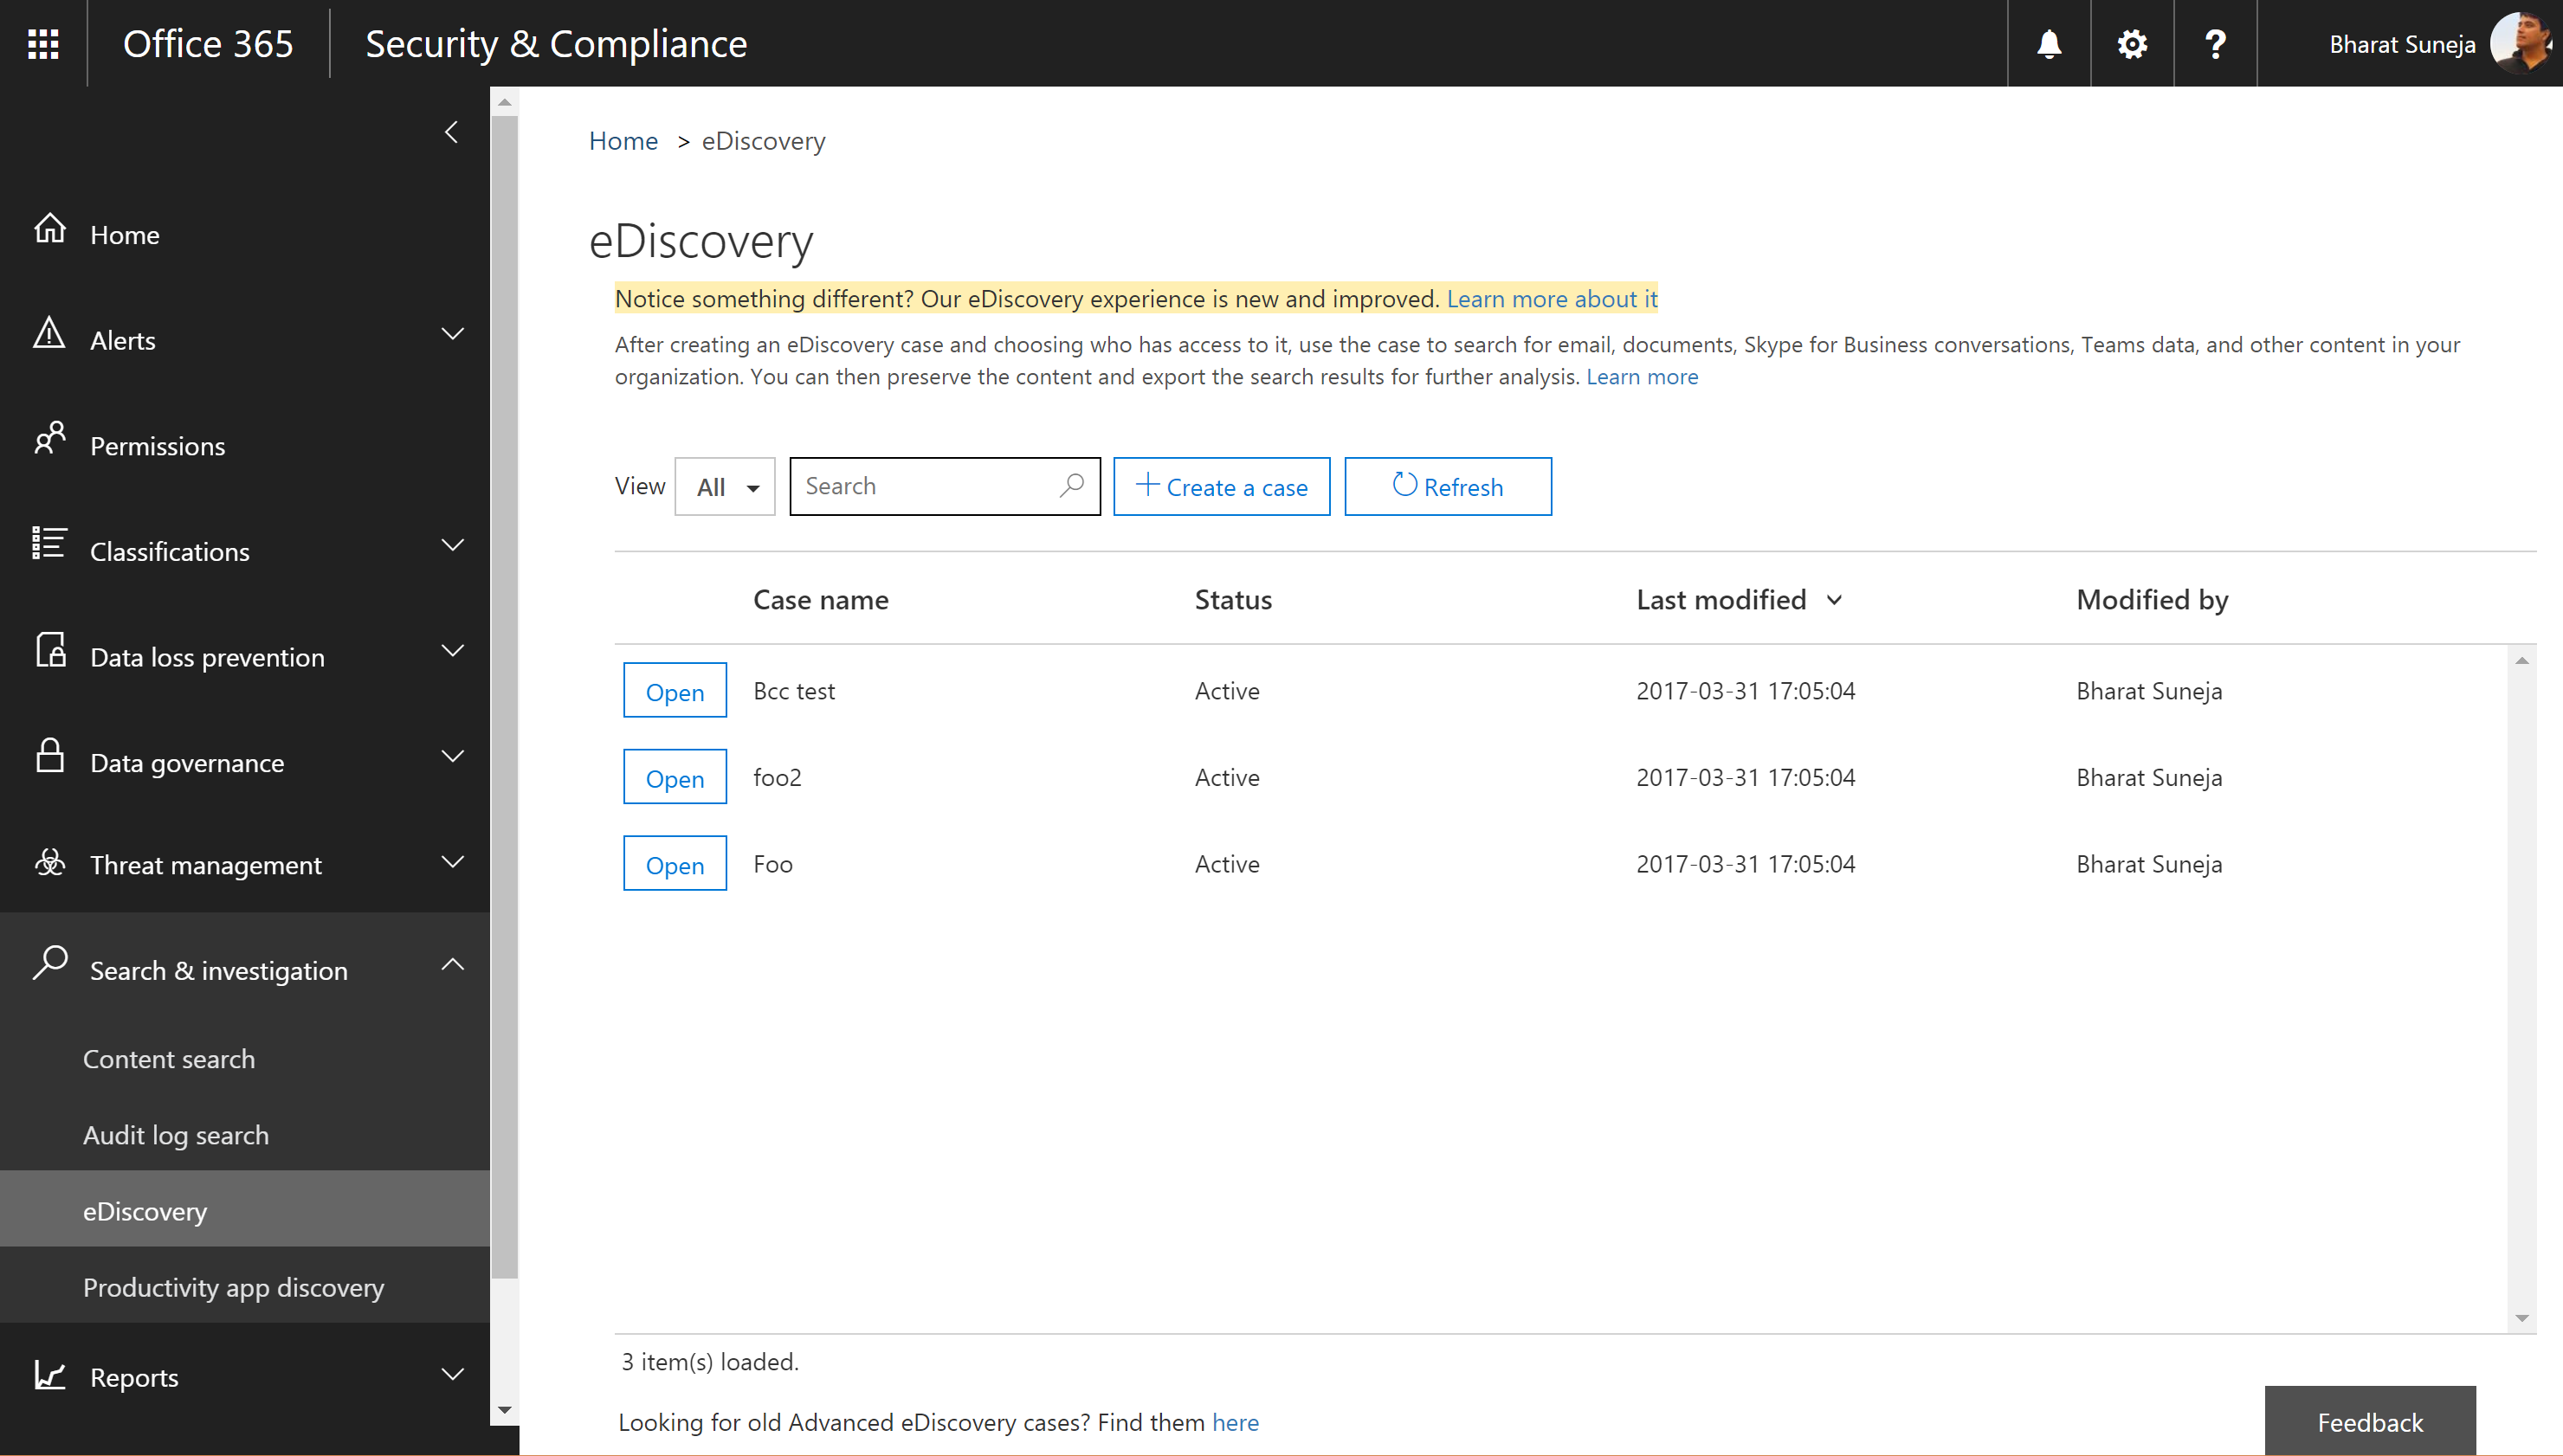 Screenshot: eDiscovery in Office 365 Security and Compliance Center